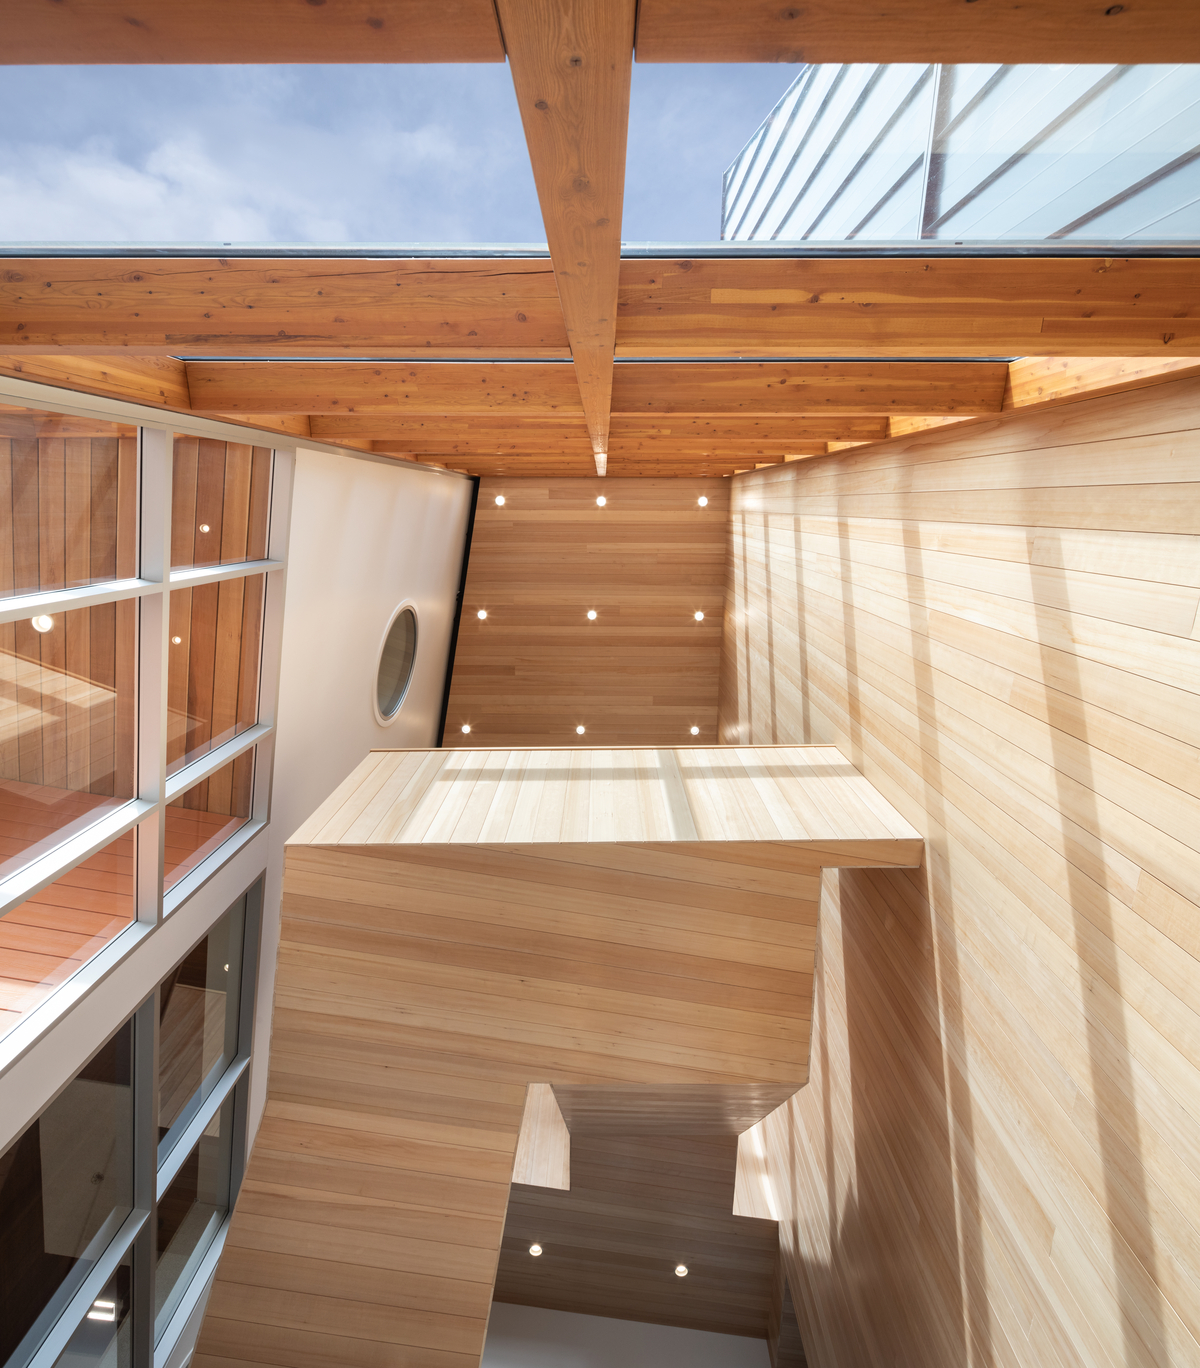 glue-laminated timber (glulam), lumber, millwork, nail-laminated timber (nlt), and paneling, are all featured in this interior upward vertical daytime image of the Ts’kw’aylaxw Cultural and Community Health Centre which highlights the multi storey wooden switchback staircase